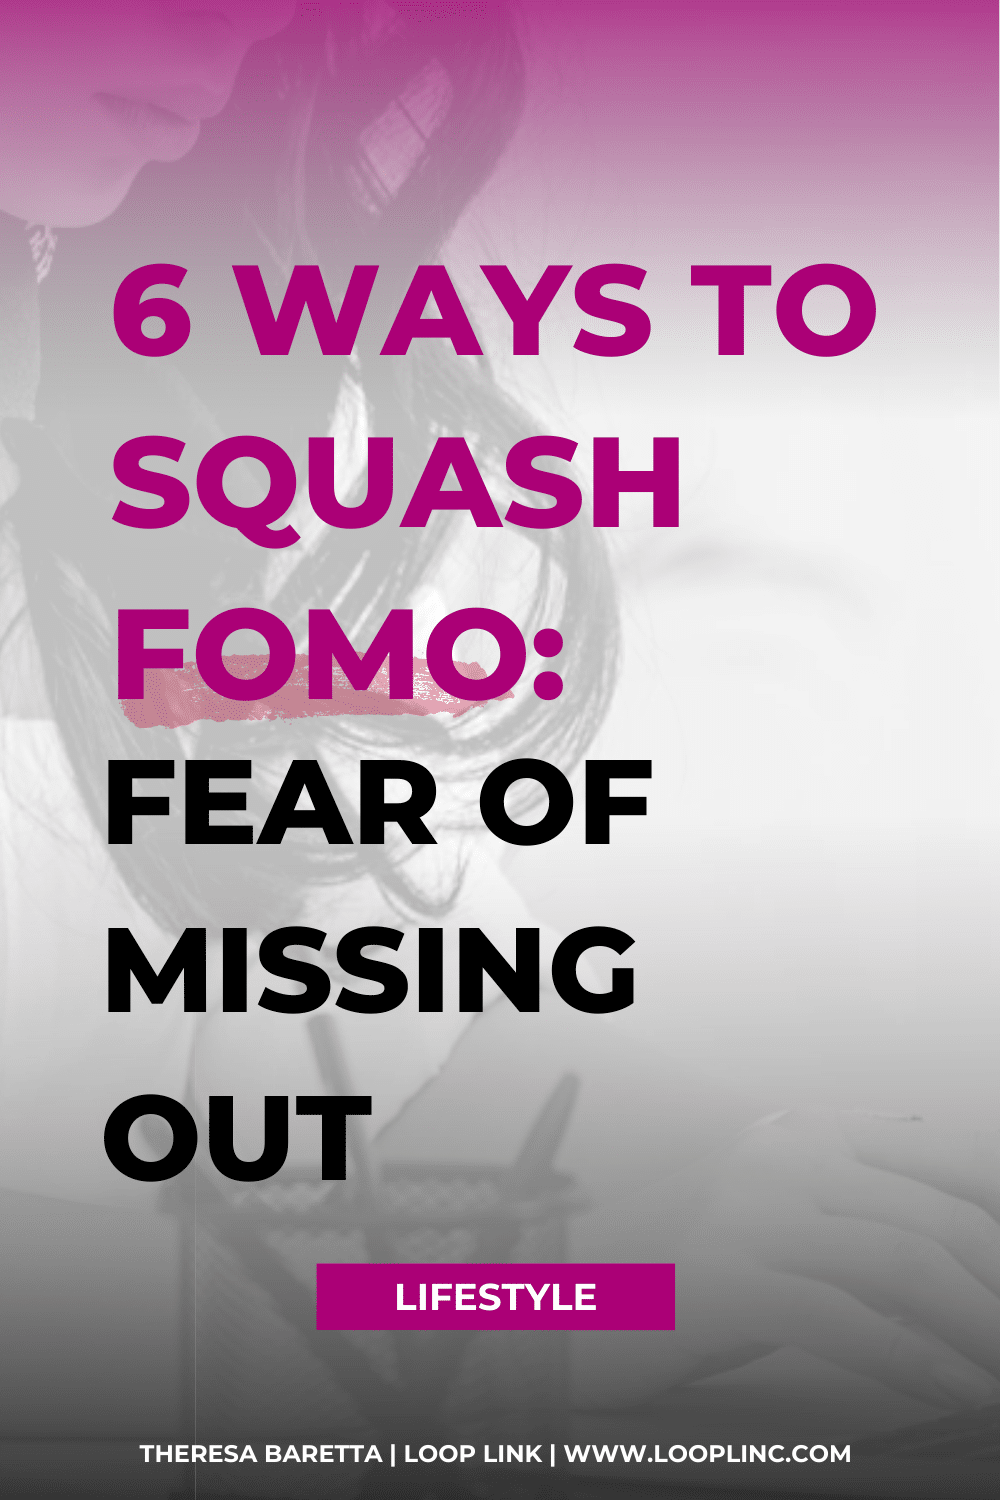 Top 6 Ways to Squash FOMO: Fear of Missing Out